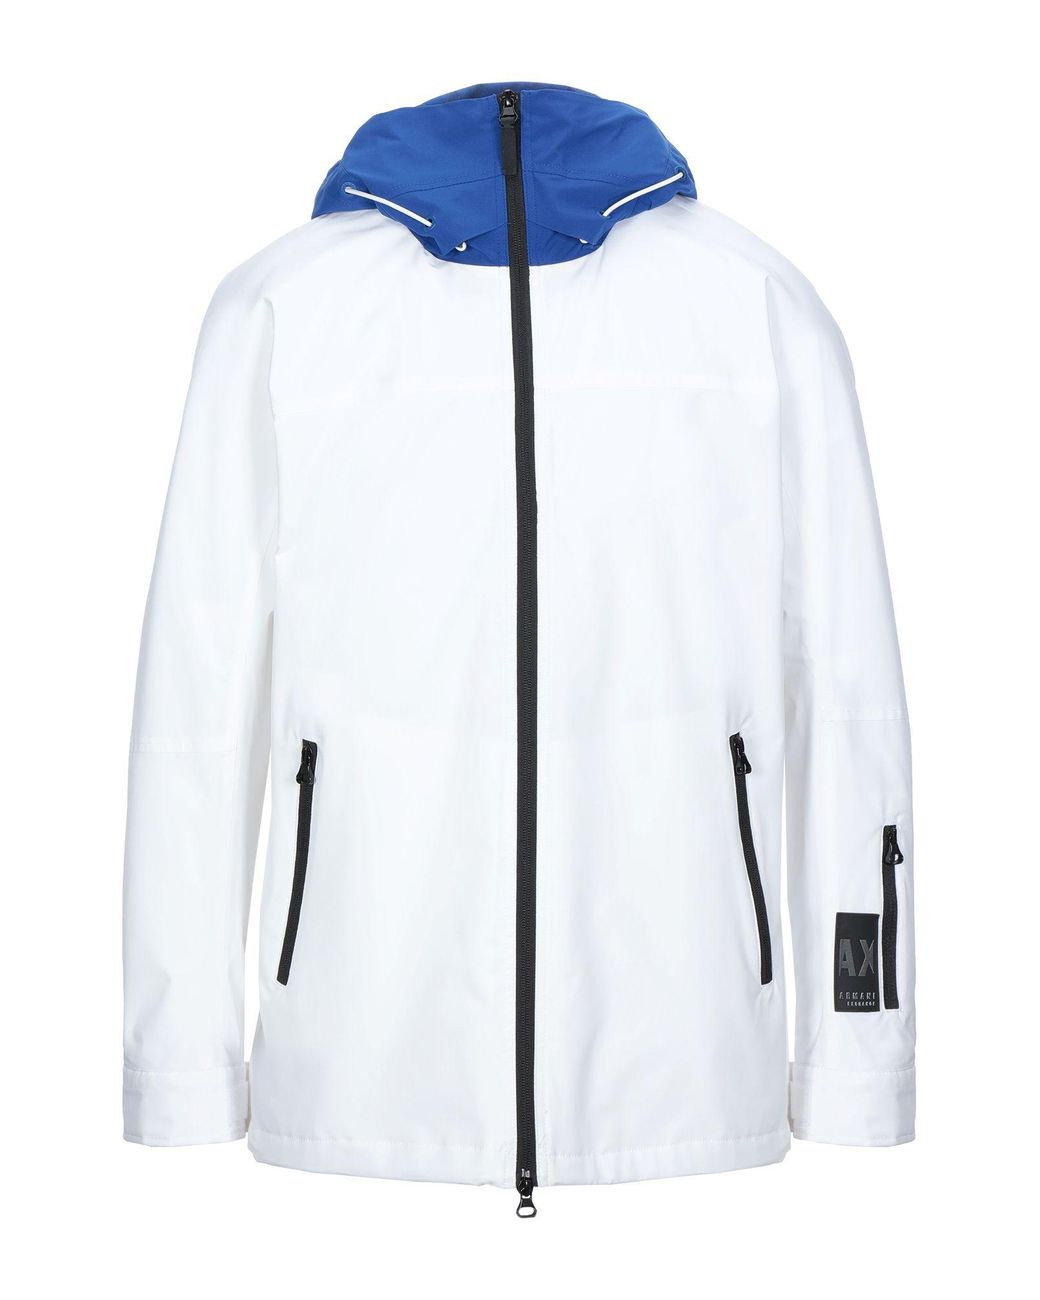 Armani Exchange Synthetic Jacket in White for Men - Lyst